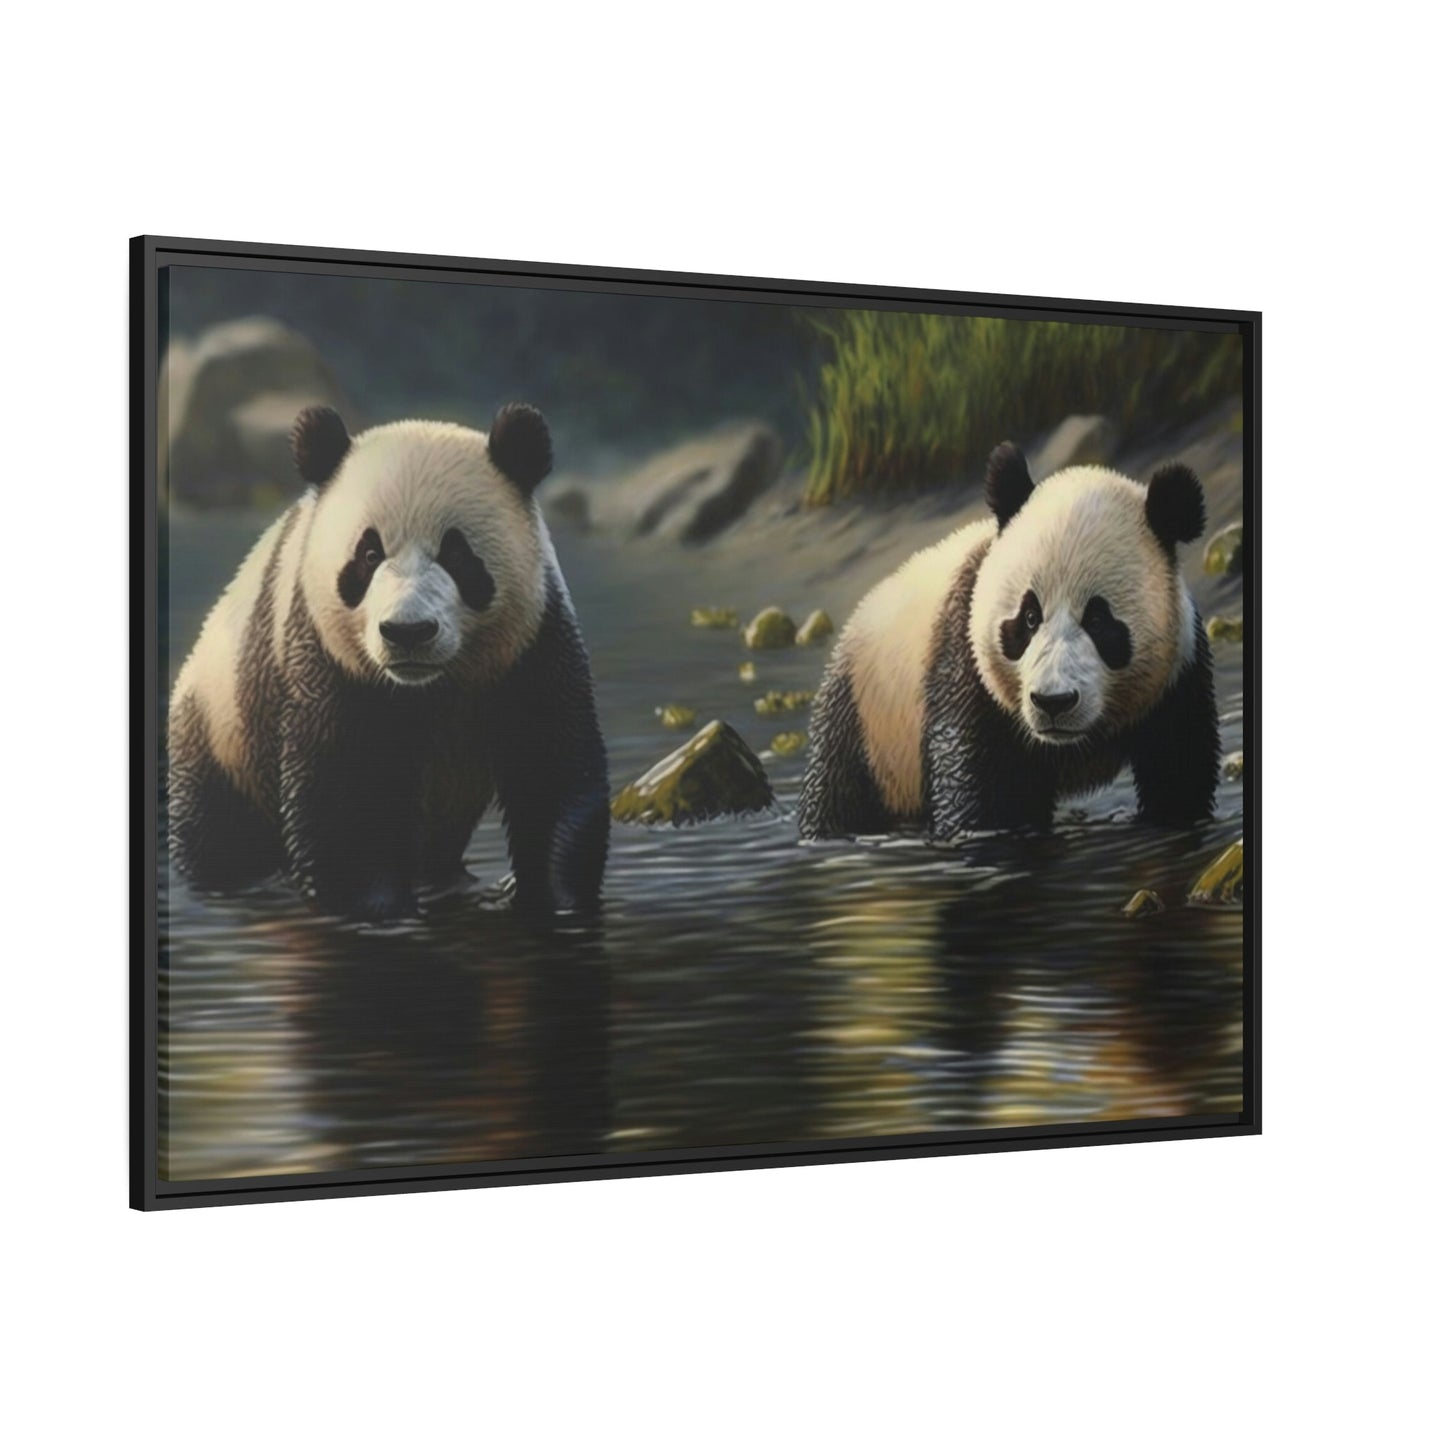 Bamboo Eaters and Playful Creatures: A Portrait of Pandas on Canvas